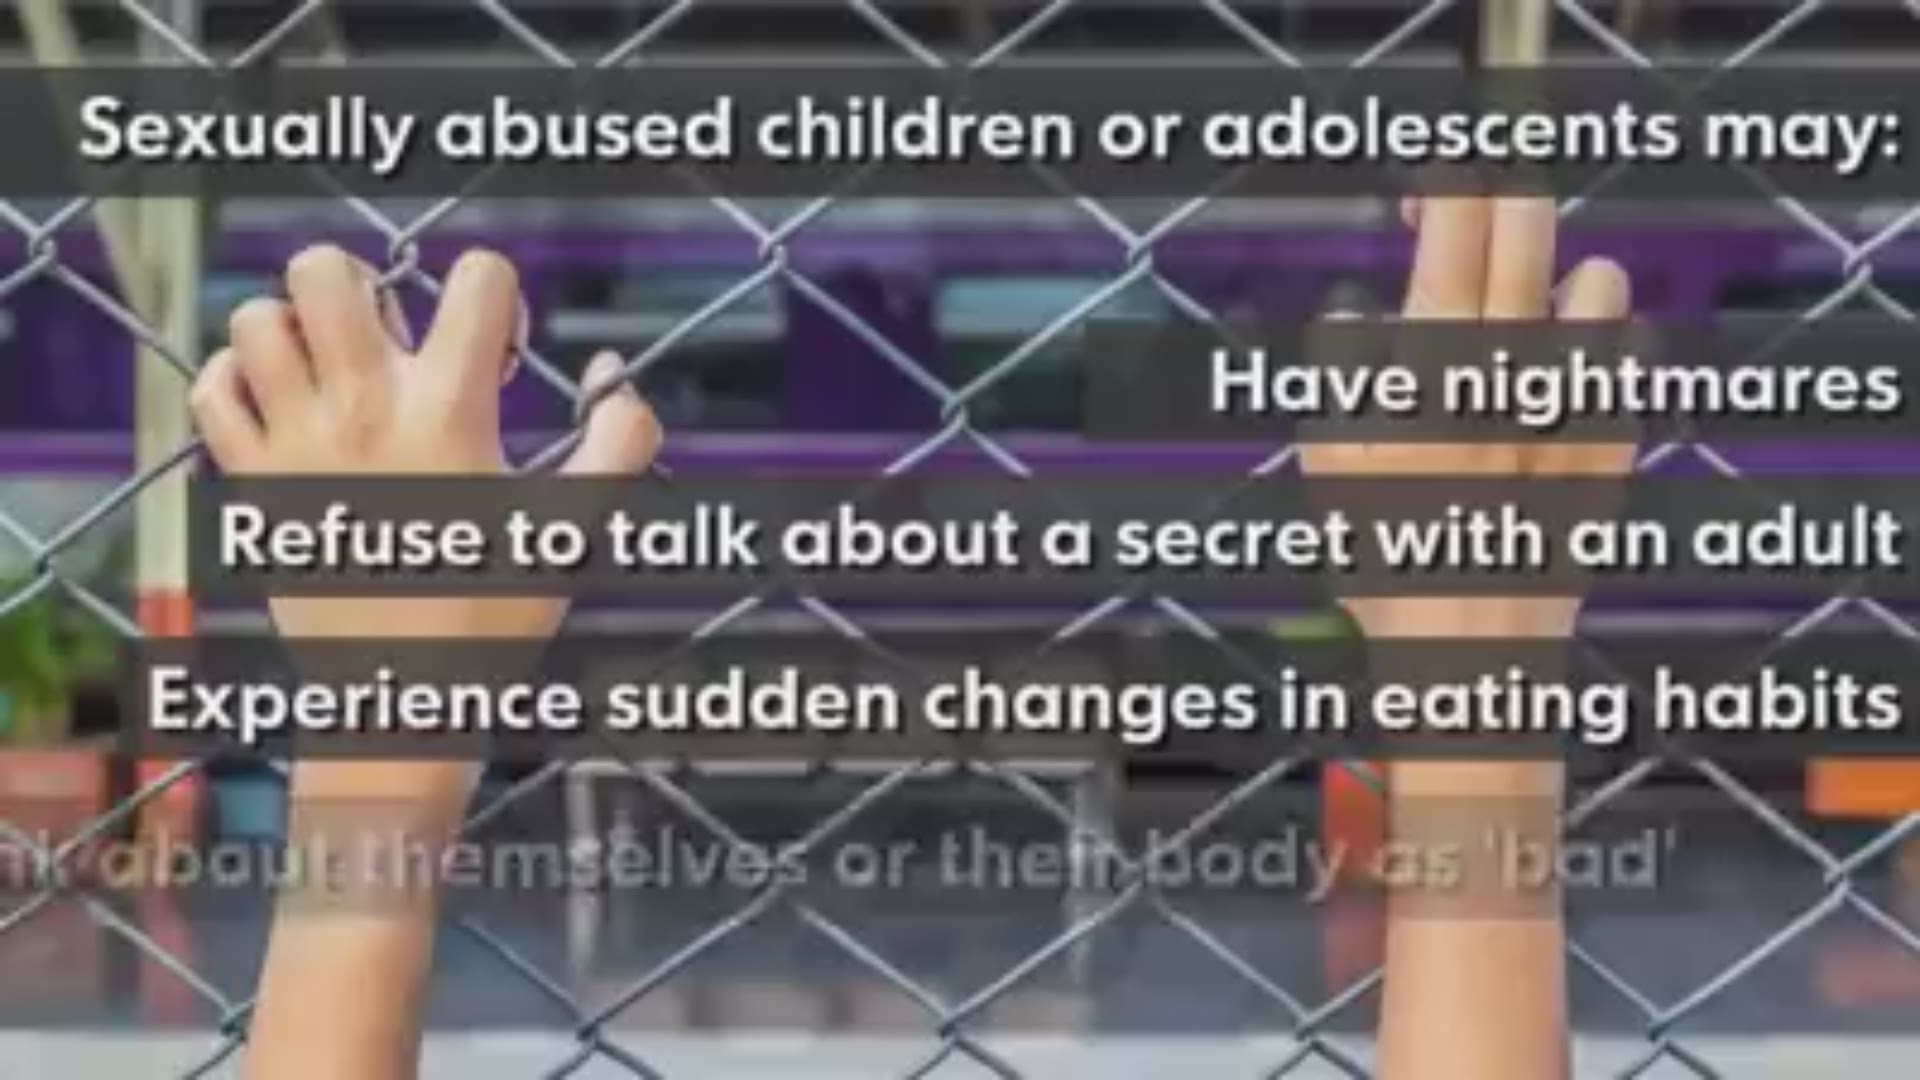 While suspecting sexual abuse of a child is difficult, there are a few characteristics and behaviors that may help identify possible abuse.